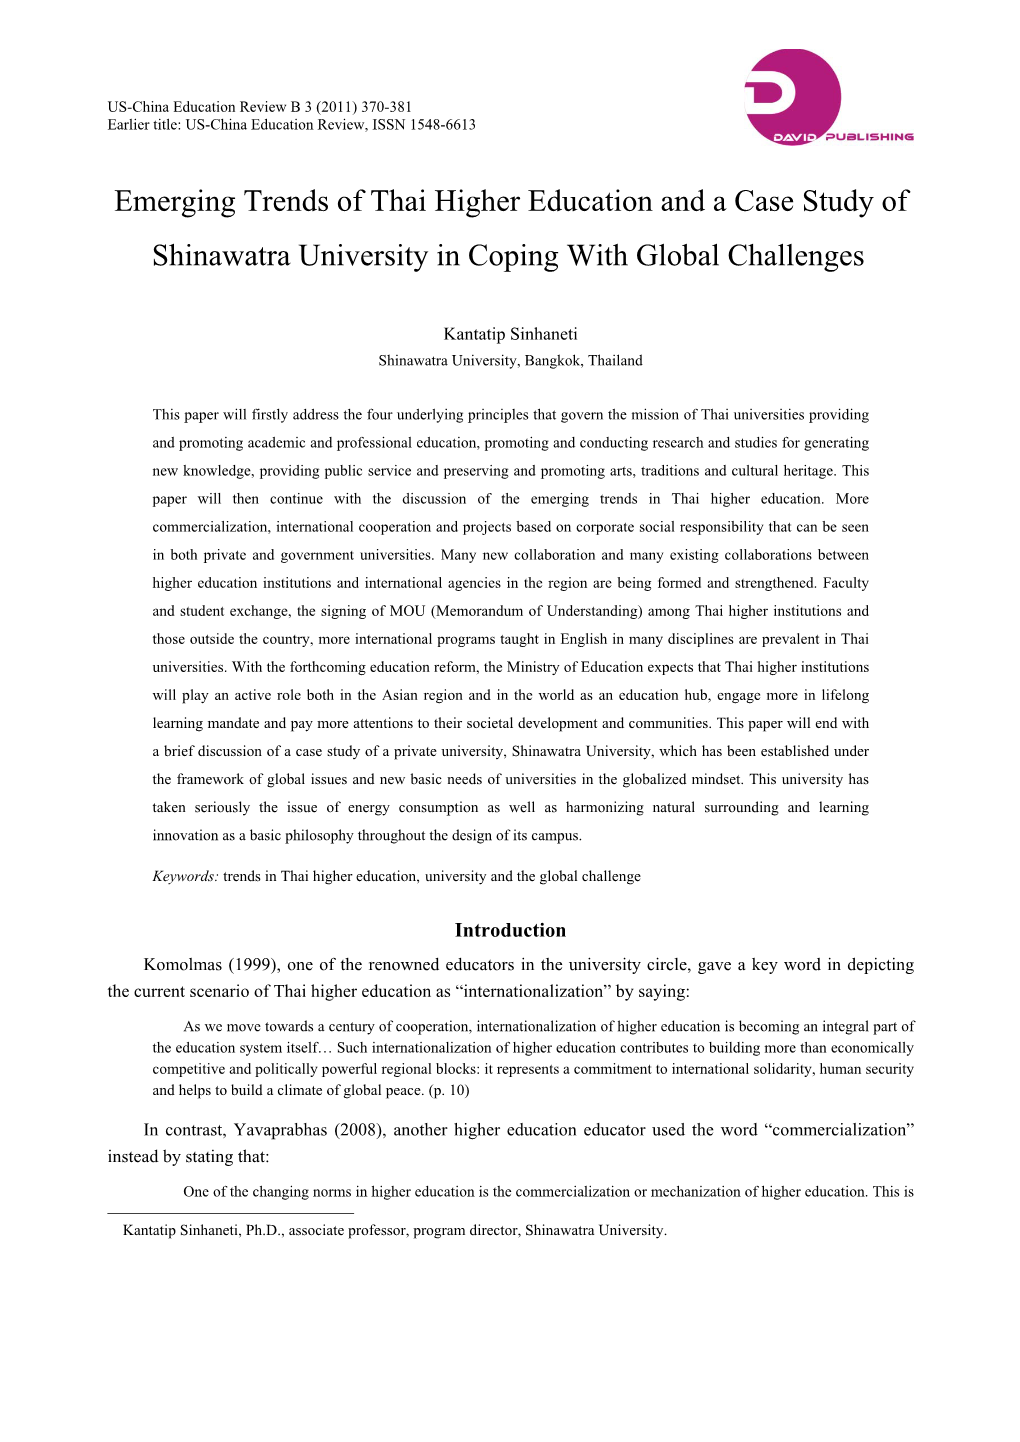 Emerging Trends of Thai Higher Education and a Case Study of Shinawatra University in Coping with Global Challenges